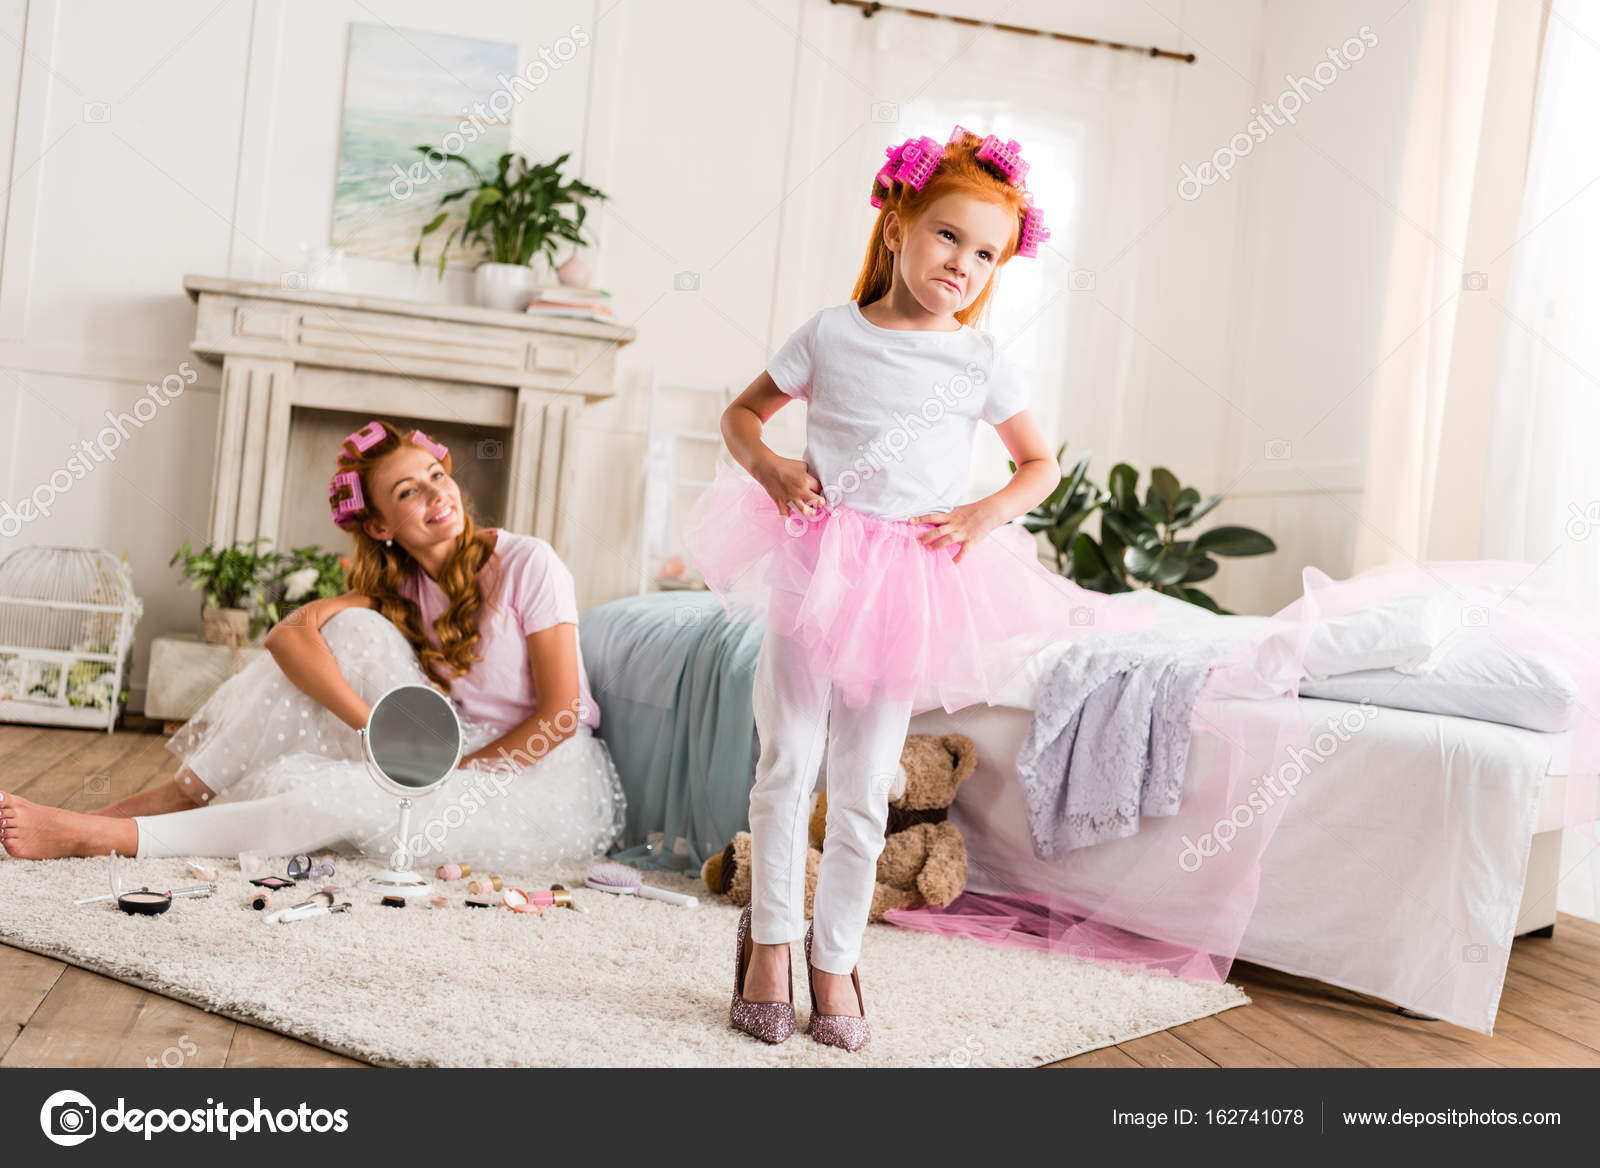 Tutus and Heels: A Parenting & Lifestyle Blog